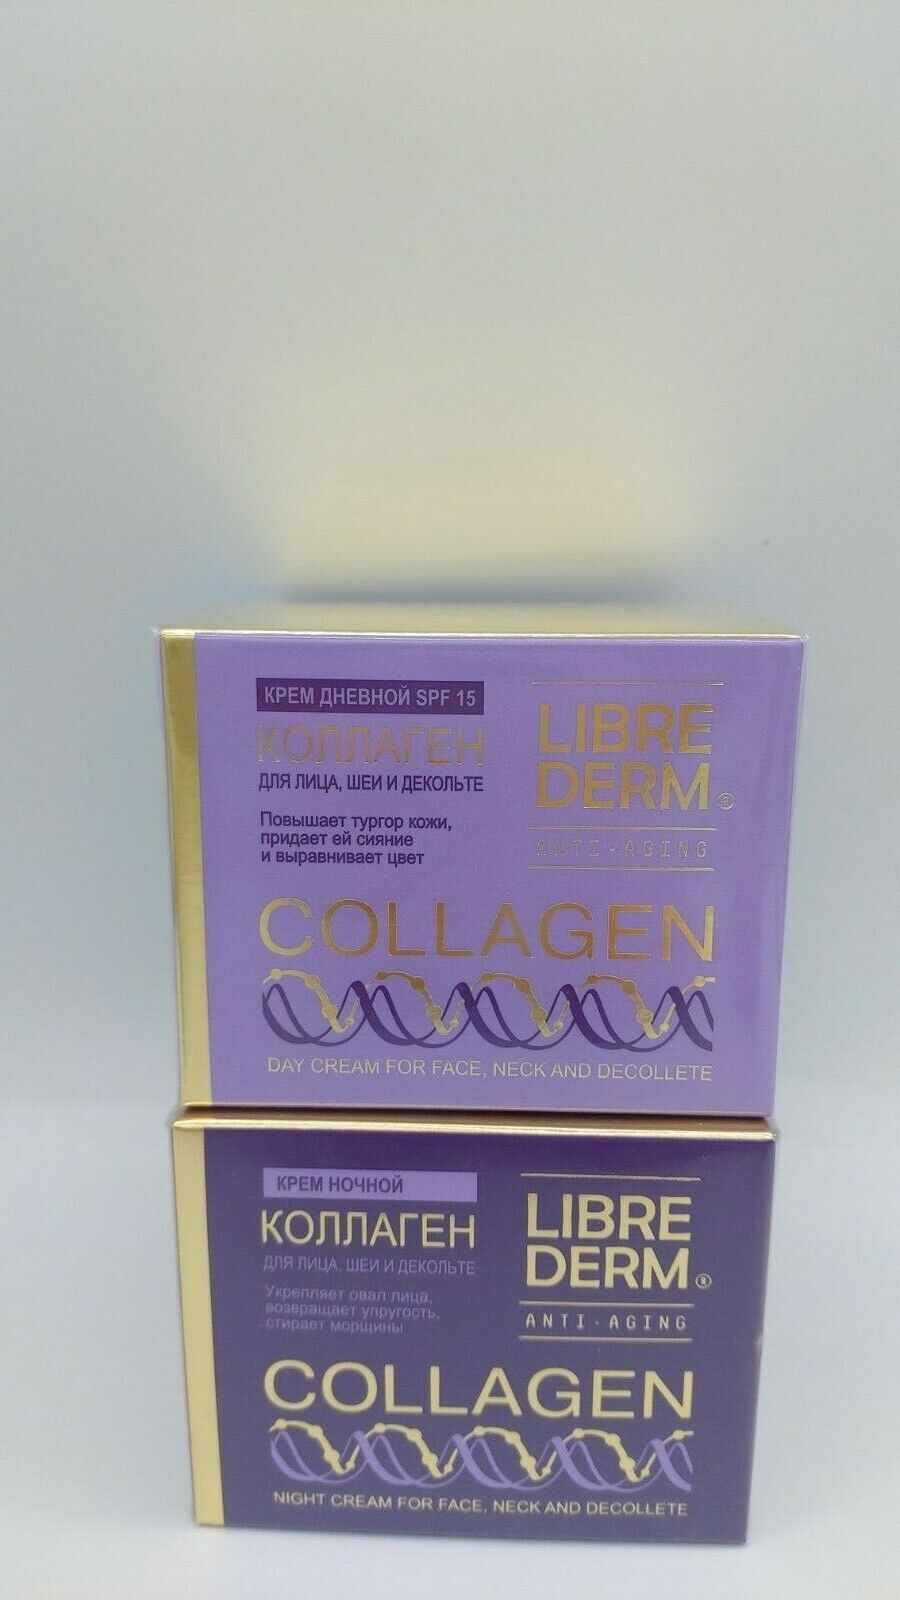 Free Shipping Cheap Bargain Gift Over item handling Librederm Day + Night Cream Reducing Collagen wrinkles and Resto